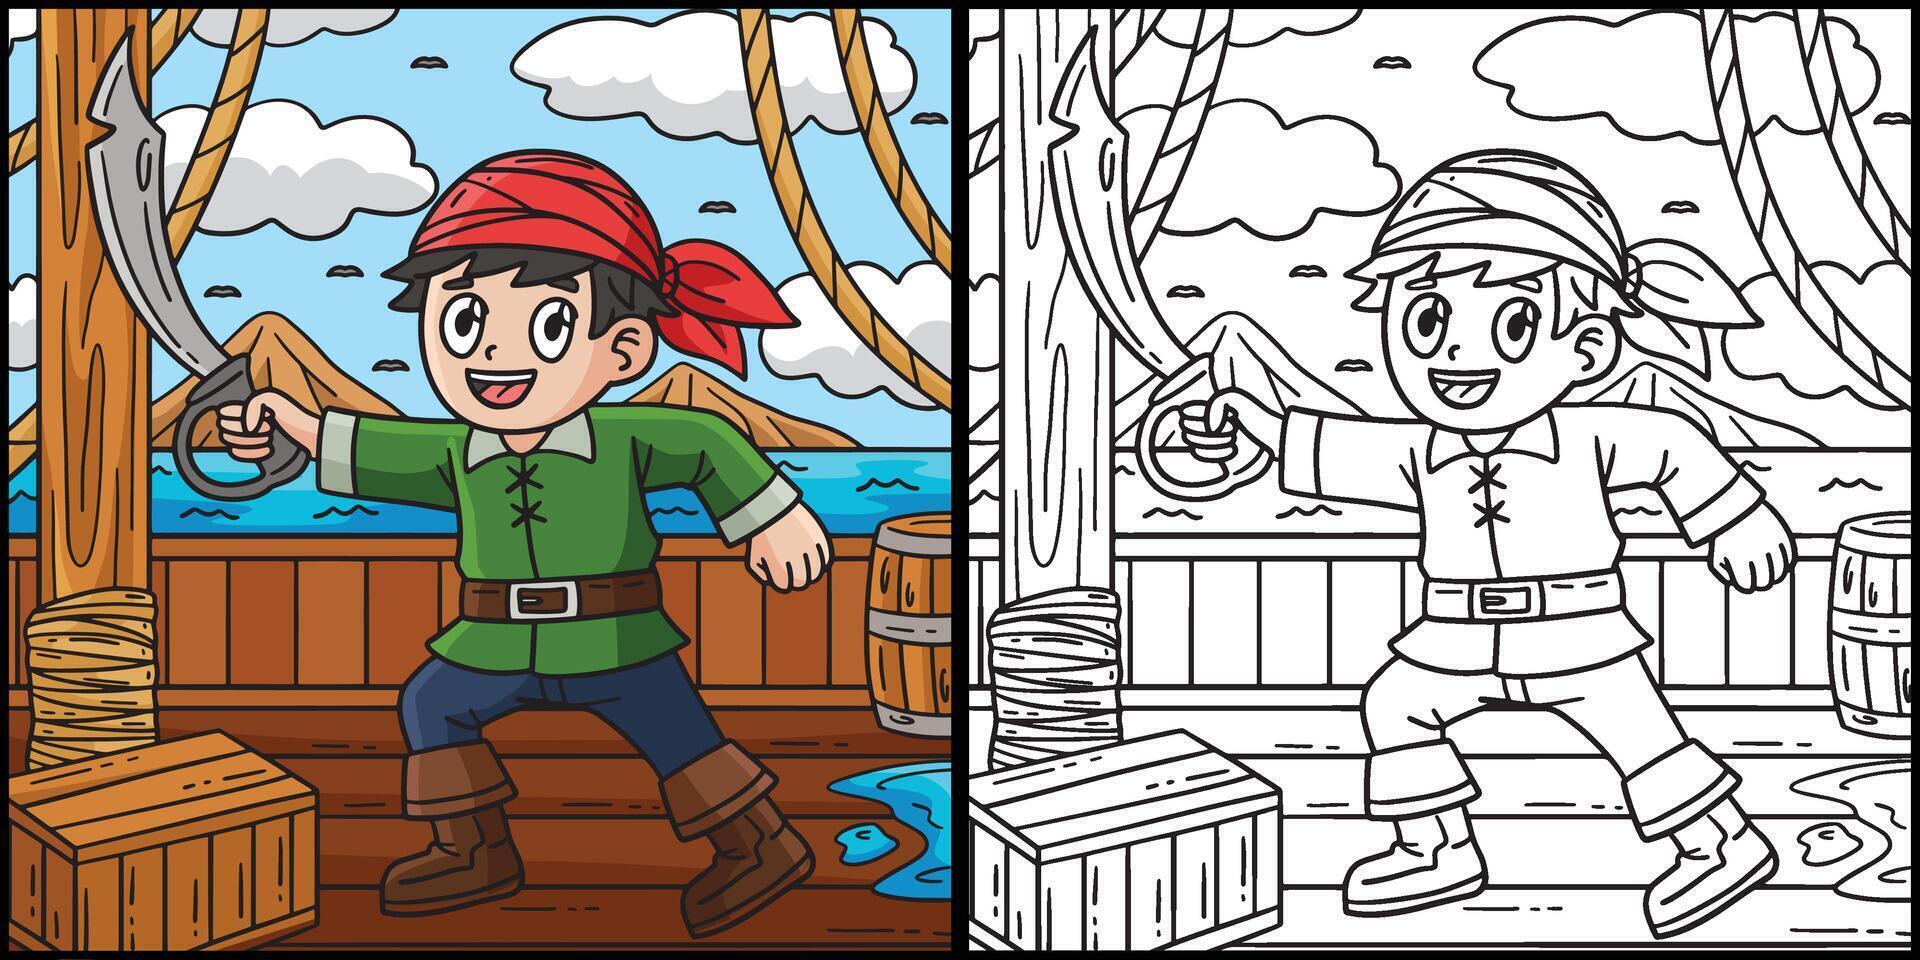 Pirate Holding Cutlass Coloring Page Illustration vector